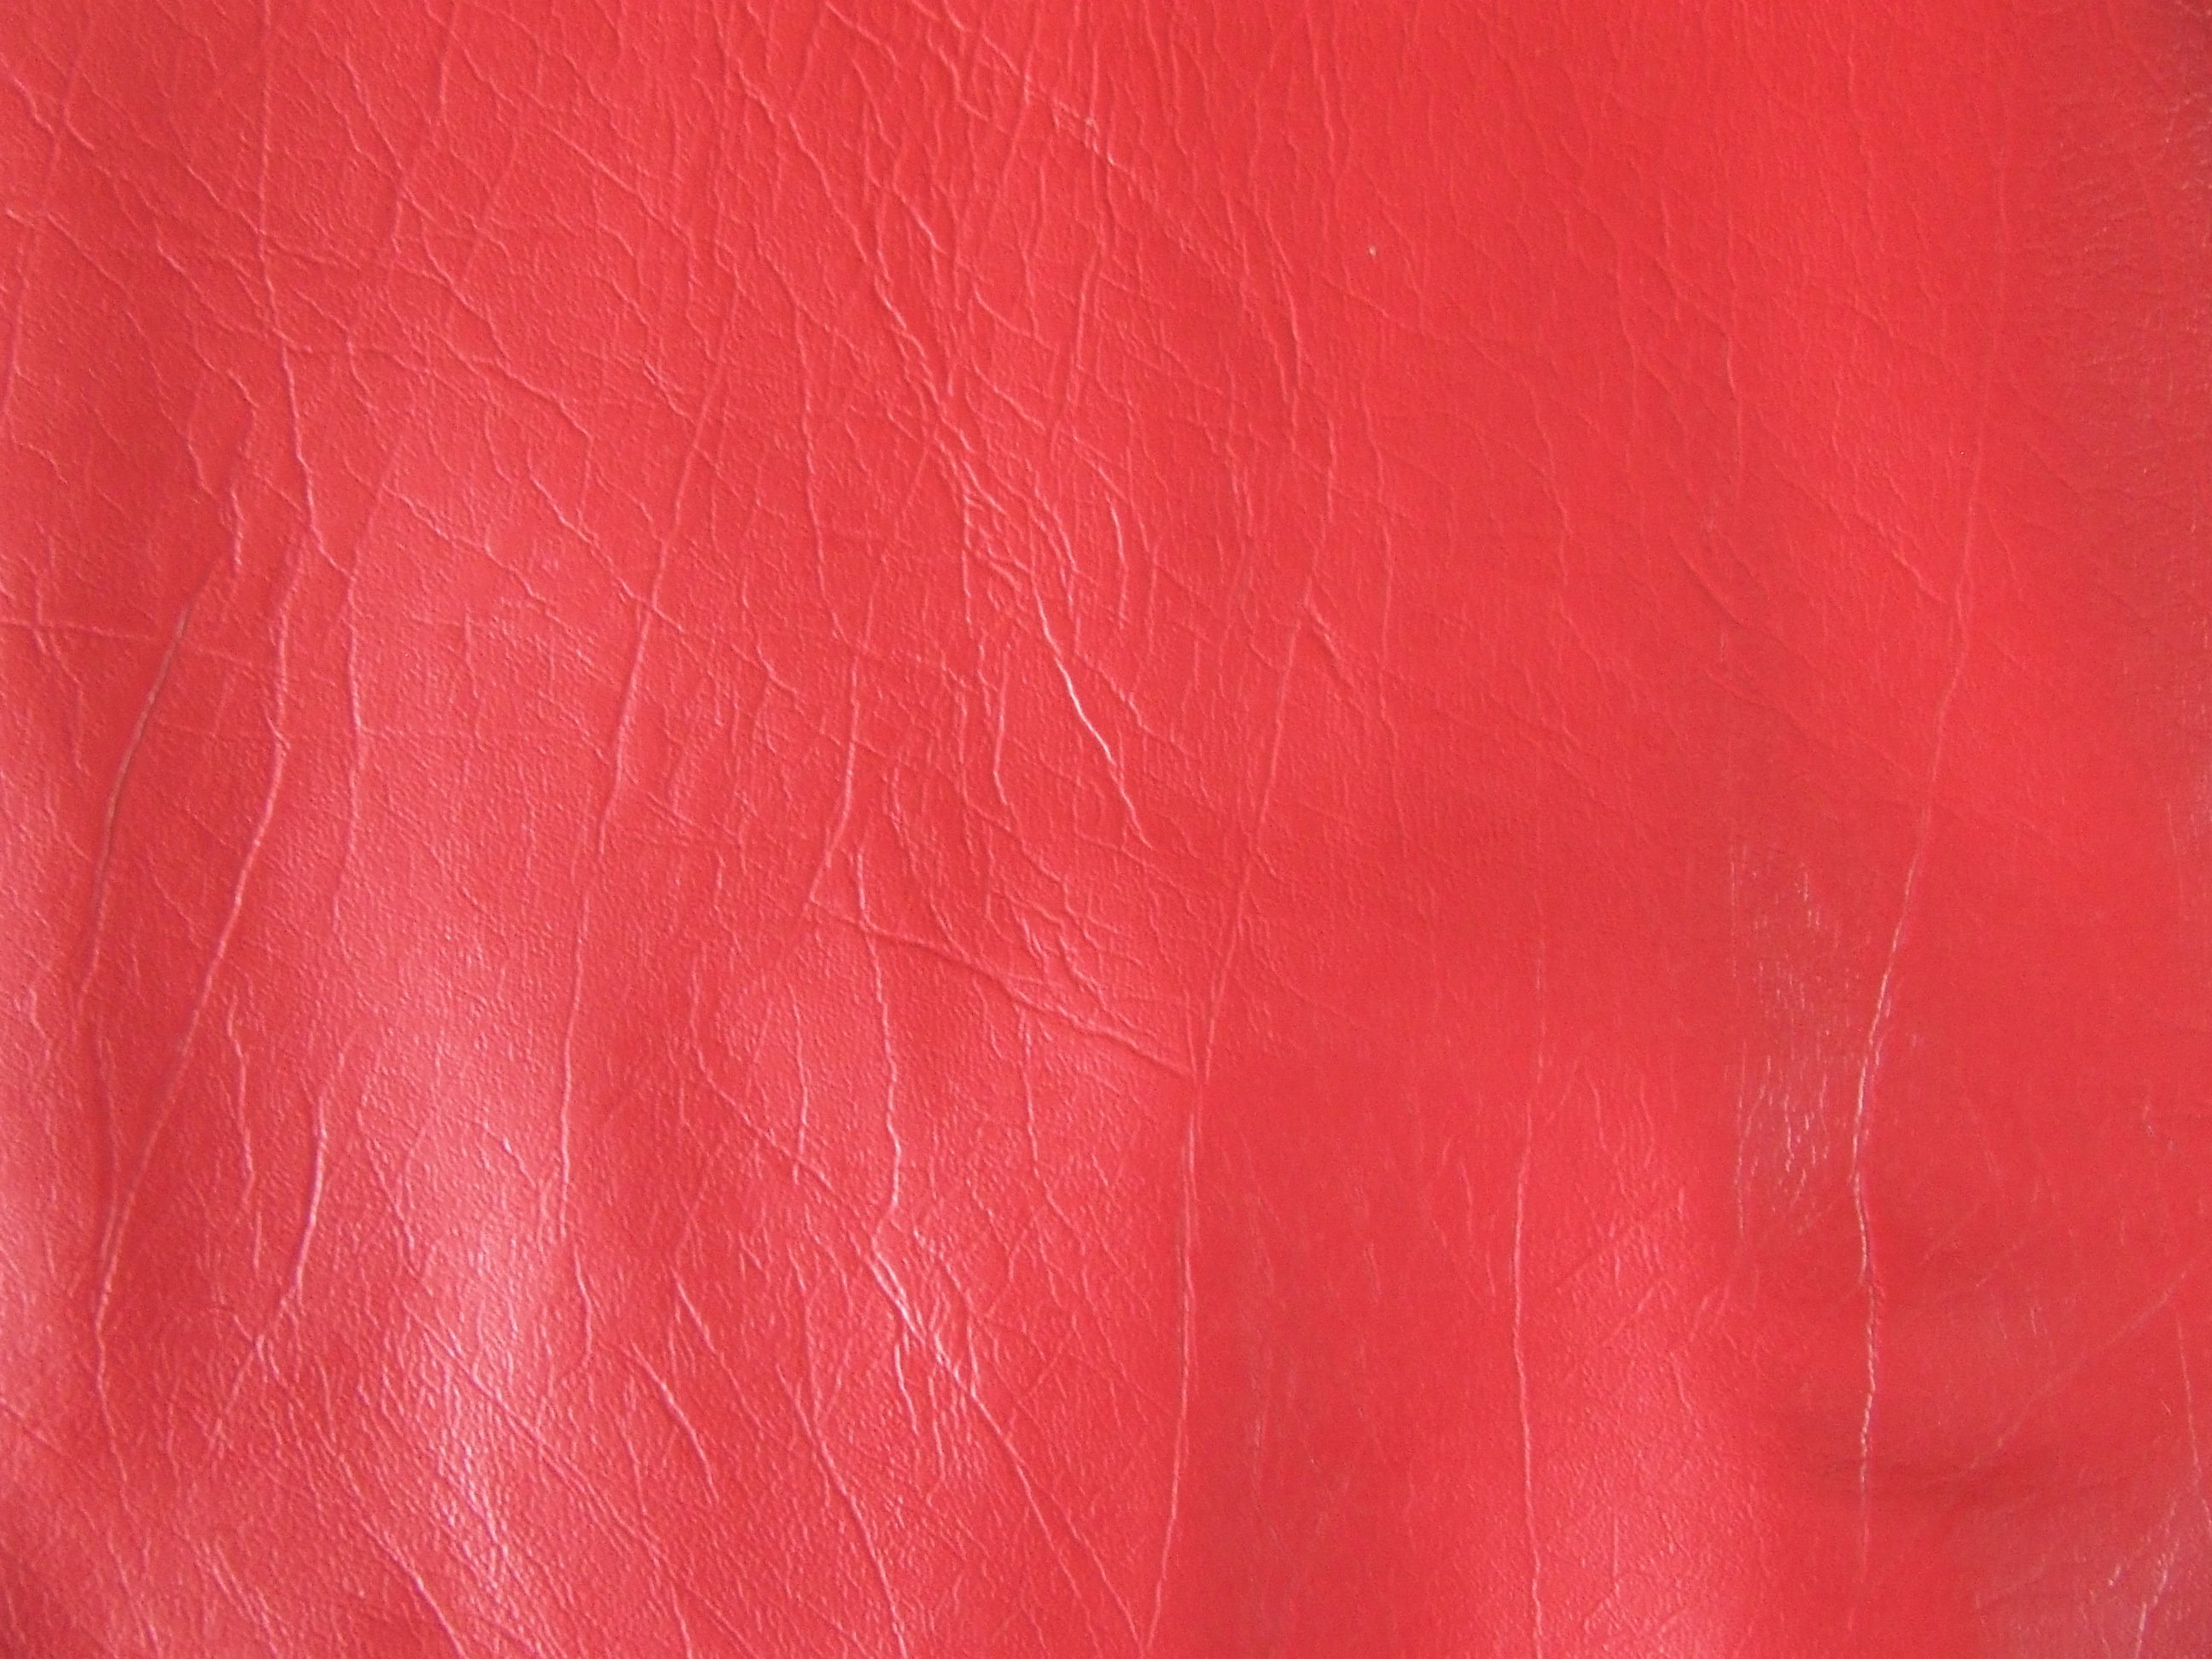 Red leather texture flickr photo sharing wallpaper background Black